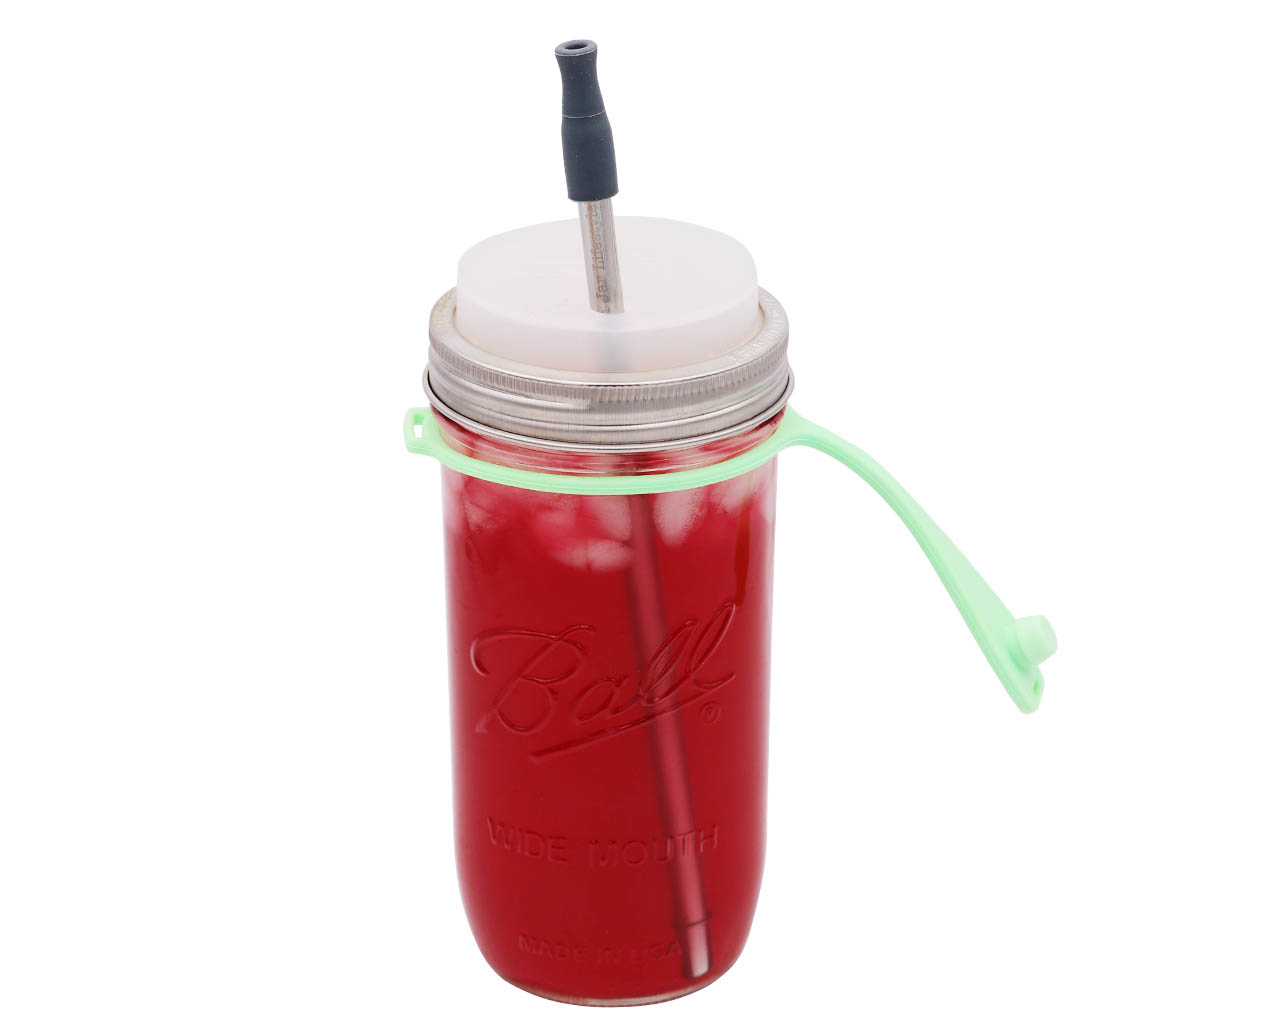 https://masonjarlifestyle.com/cdn/shop/files/mason-jar-lifestyle-silicone-straw-hole-tumbler-leak-proof-plug-stopper-strap-mint-green-24oz-ball-wide-mouth-frost-lid-charcoal-gray-tip-stainless-steel-juice-2.jpg?v=1695767400&width=1280